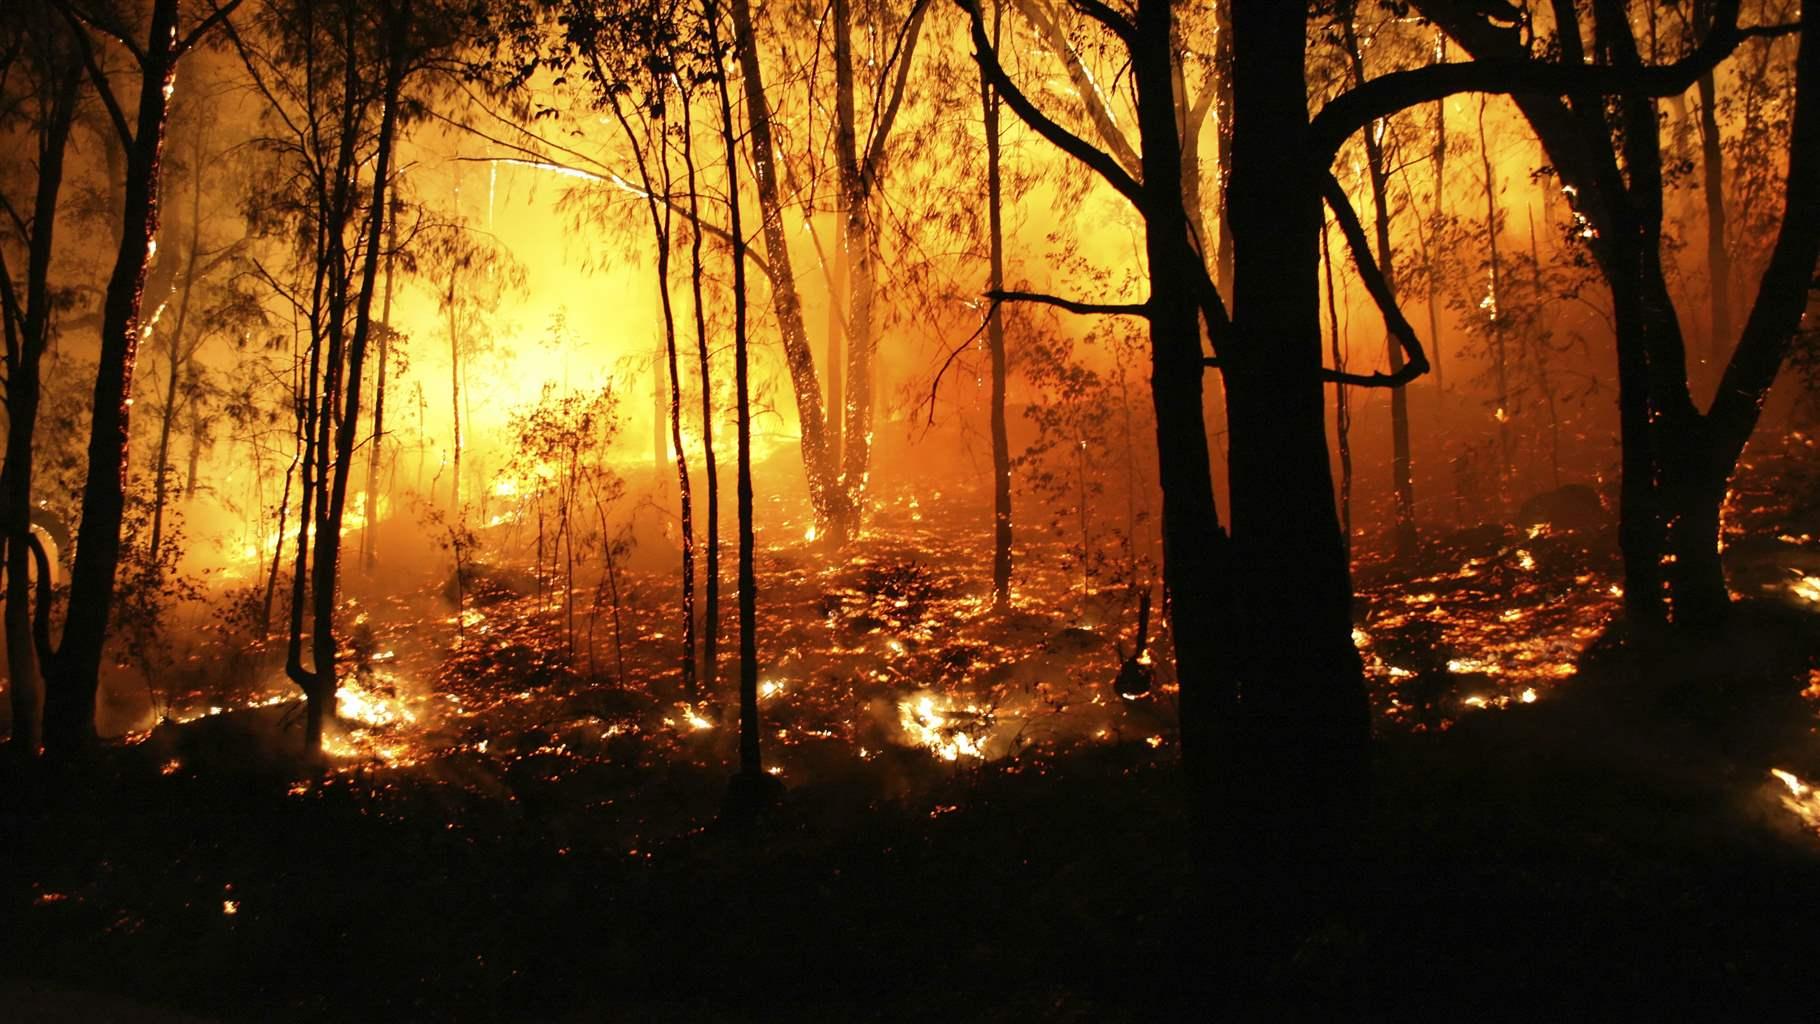 From a bushfire in 2007 where 2000 Hectares were burnt out.